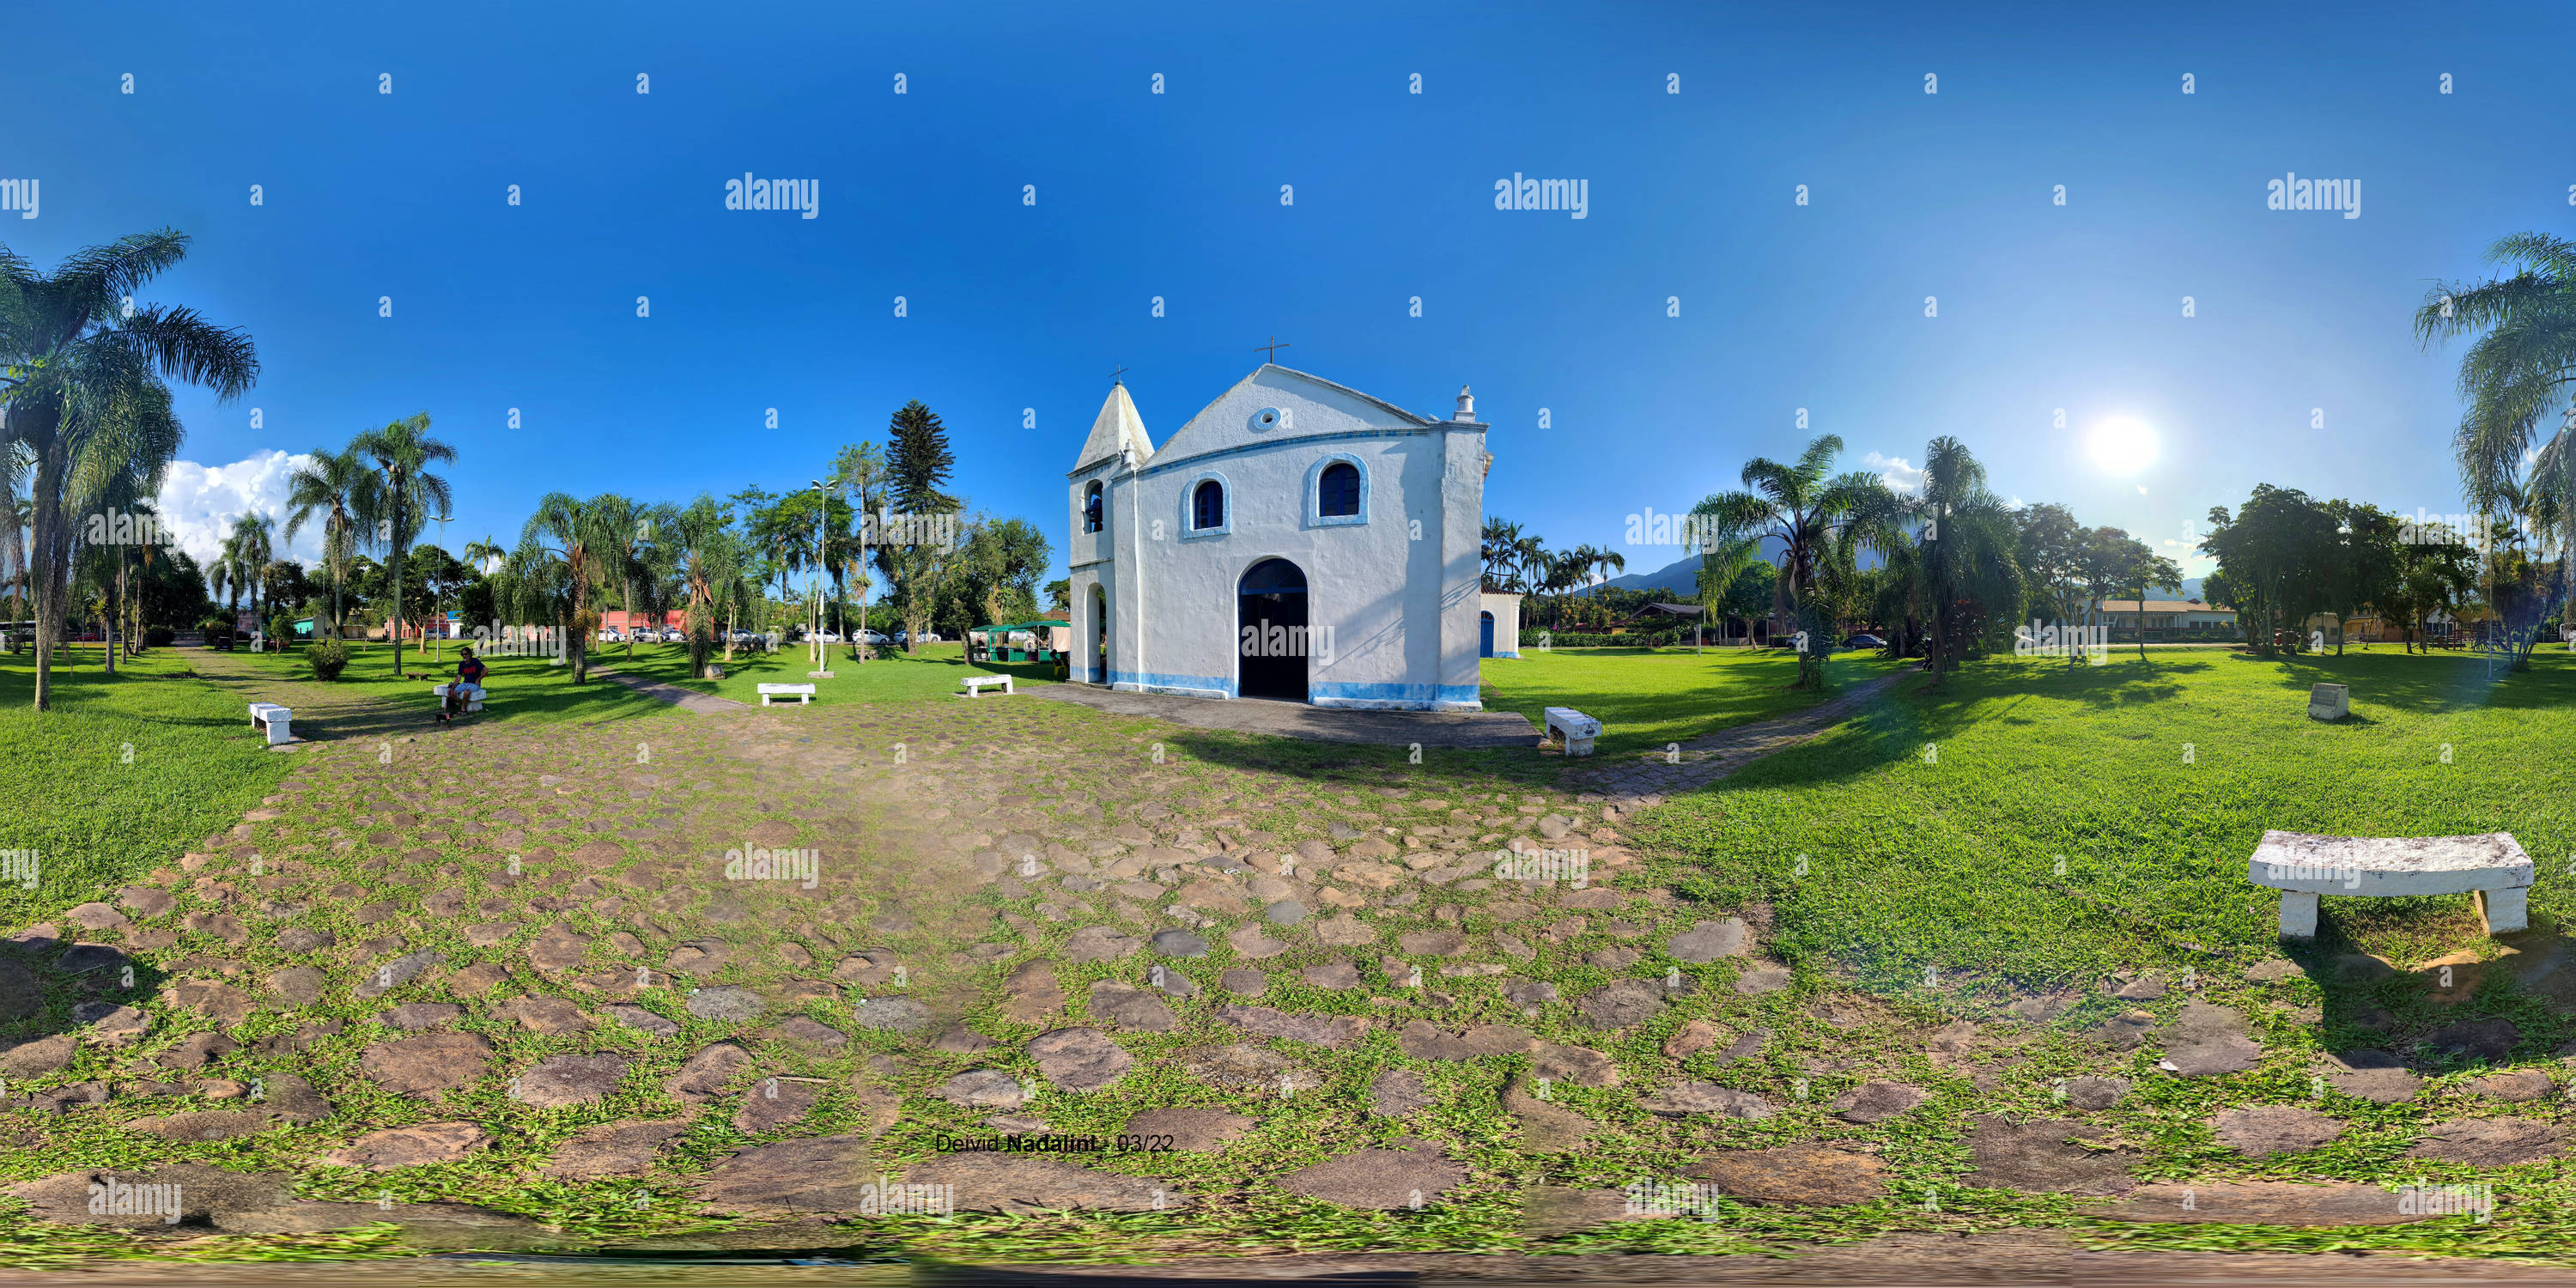 360 degree panoramic view of Church of São Sebastião, in Morretes, Brazil, on a beautiful sunny day.